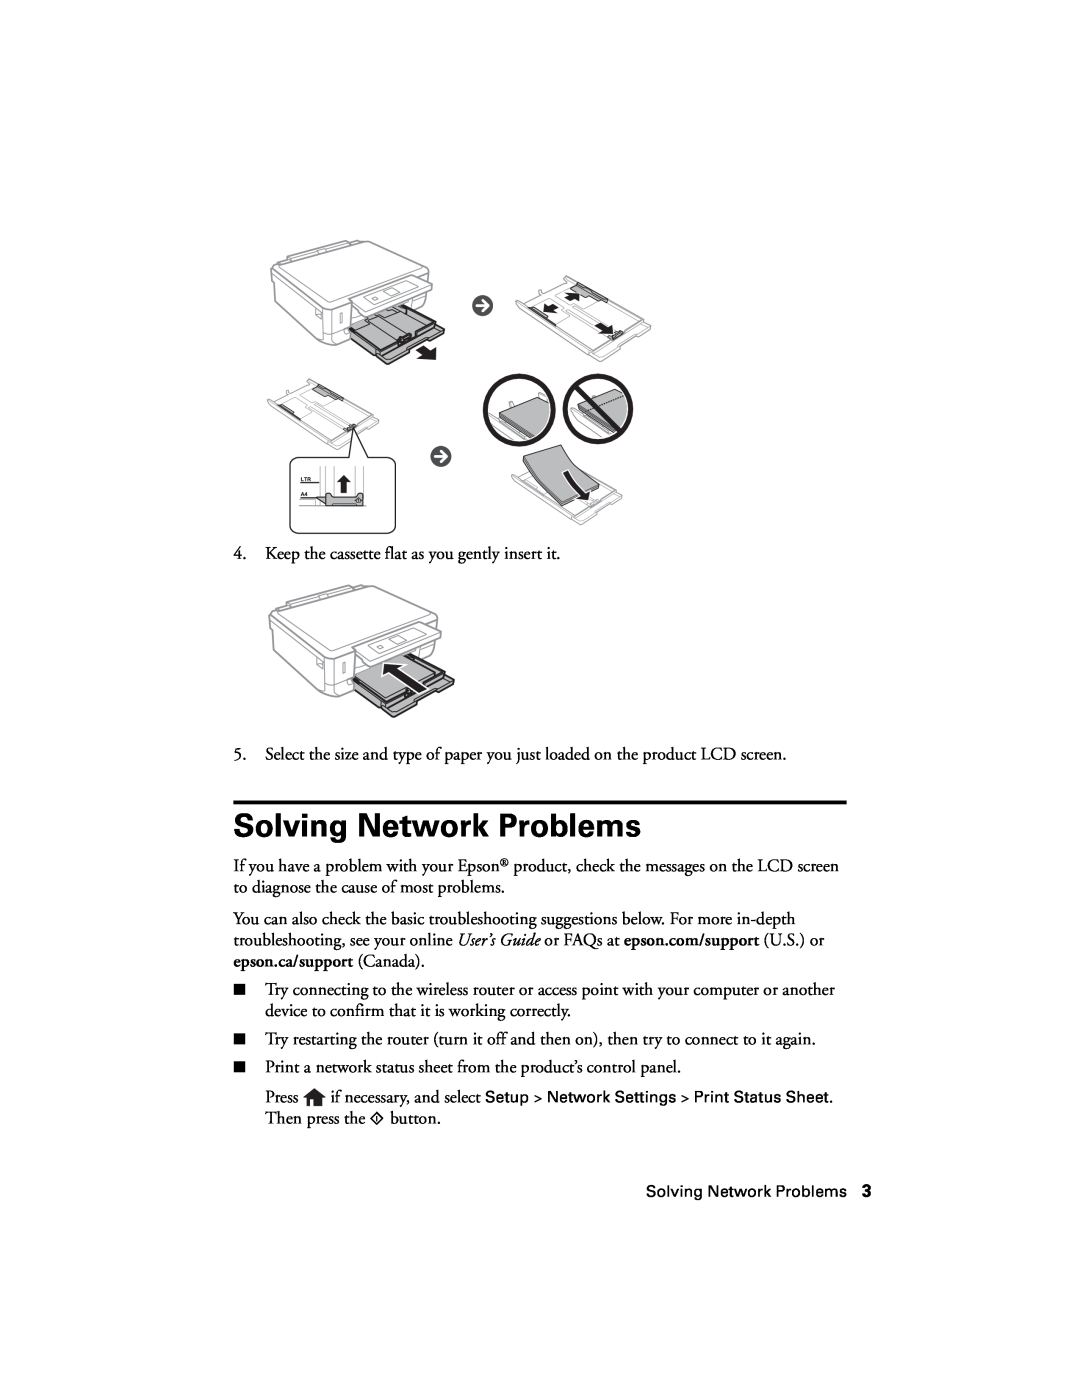 Epson XP-520 manual Solving Network Problems 